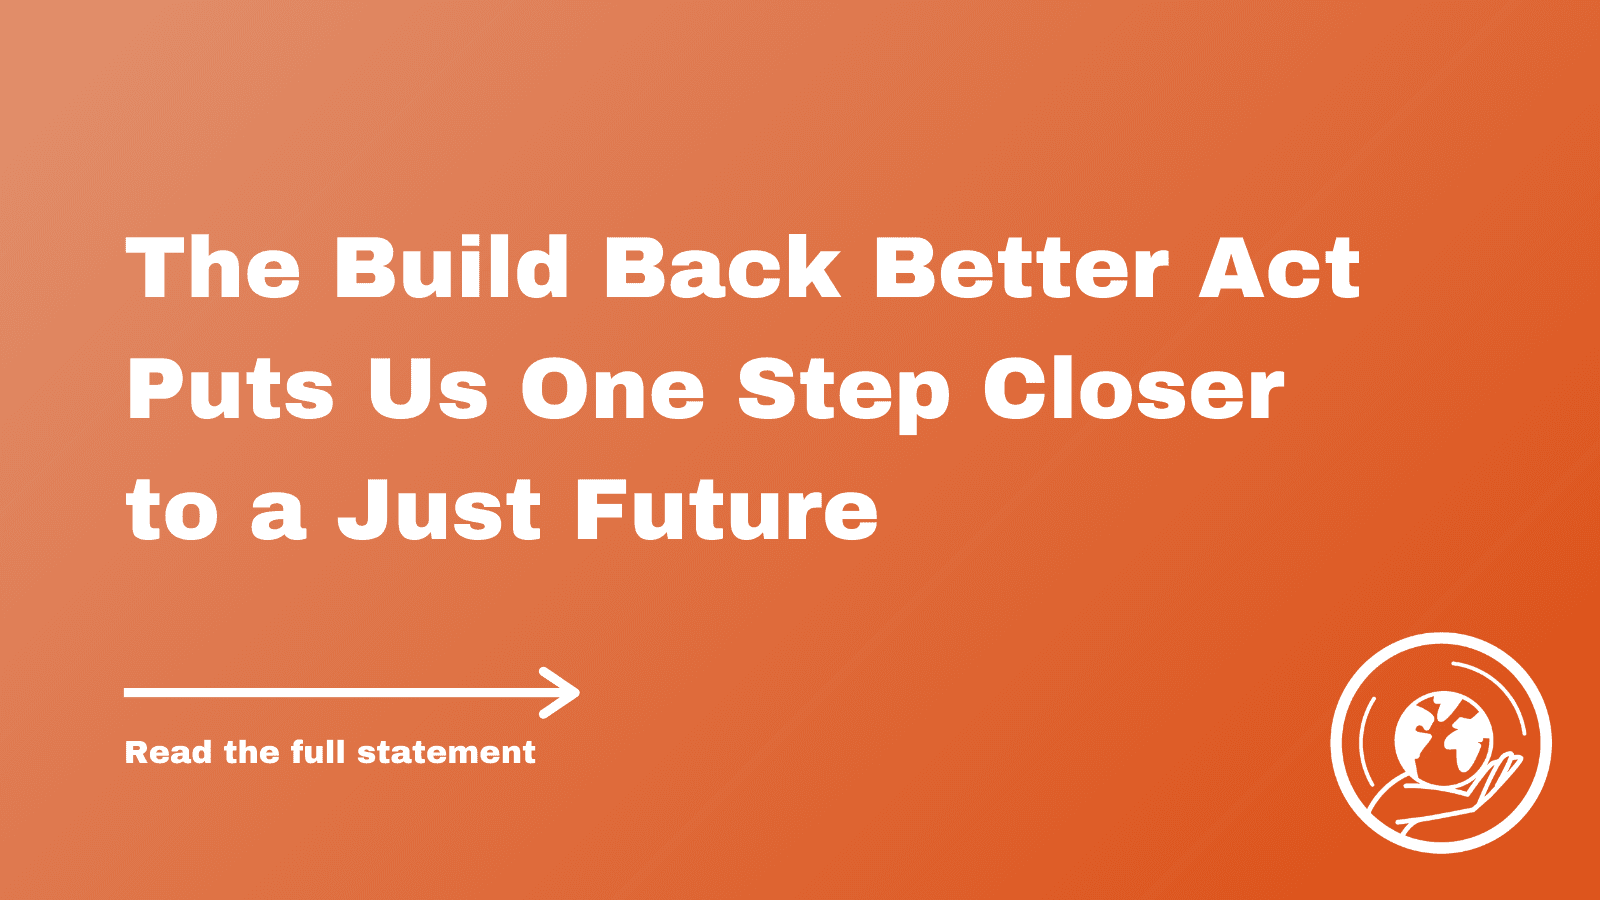 The Build Back Better Act Puts Us One Step Closer to a Just Future